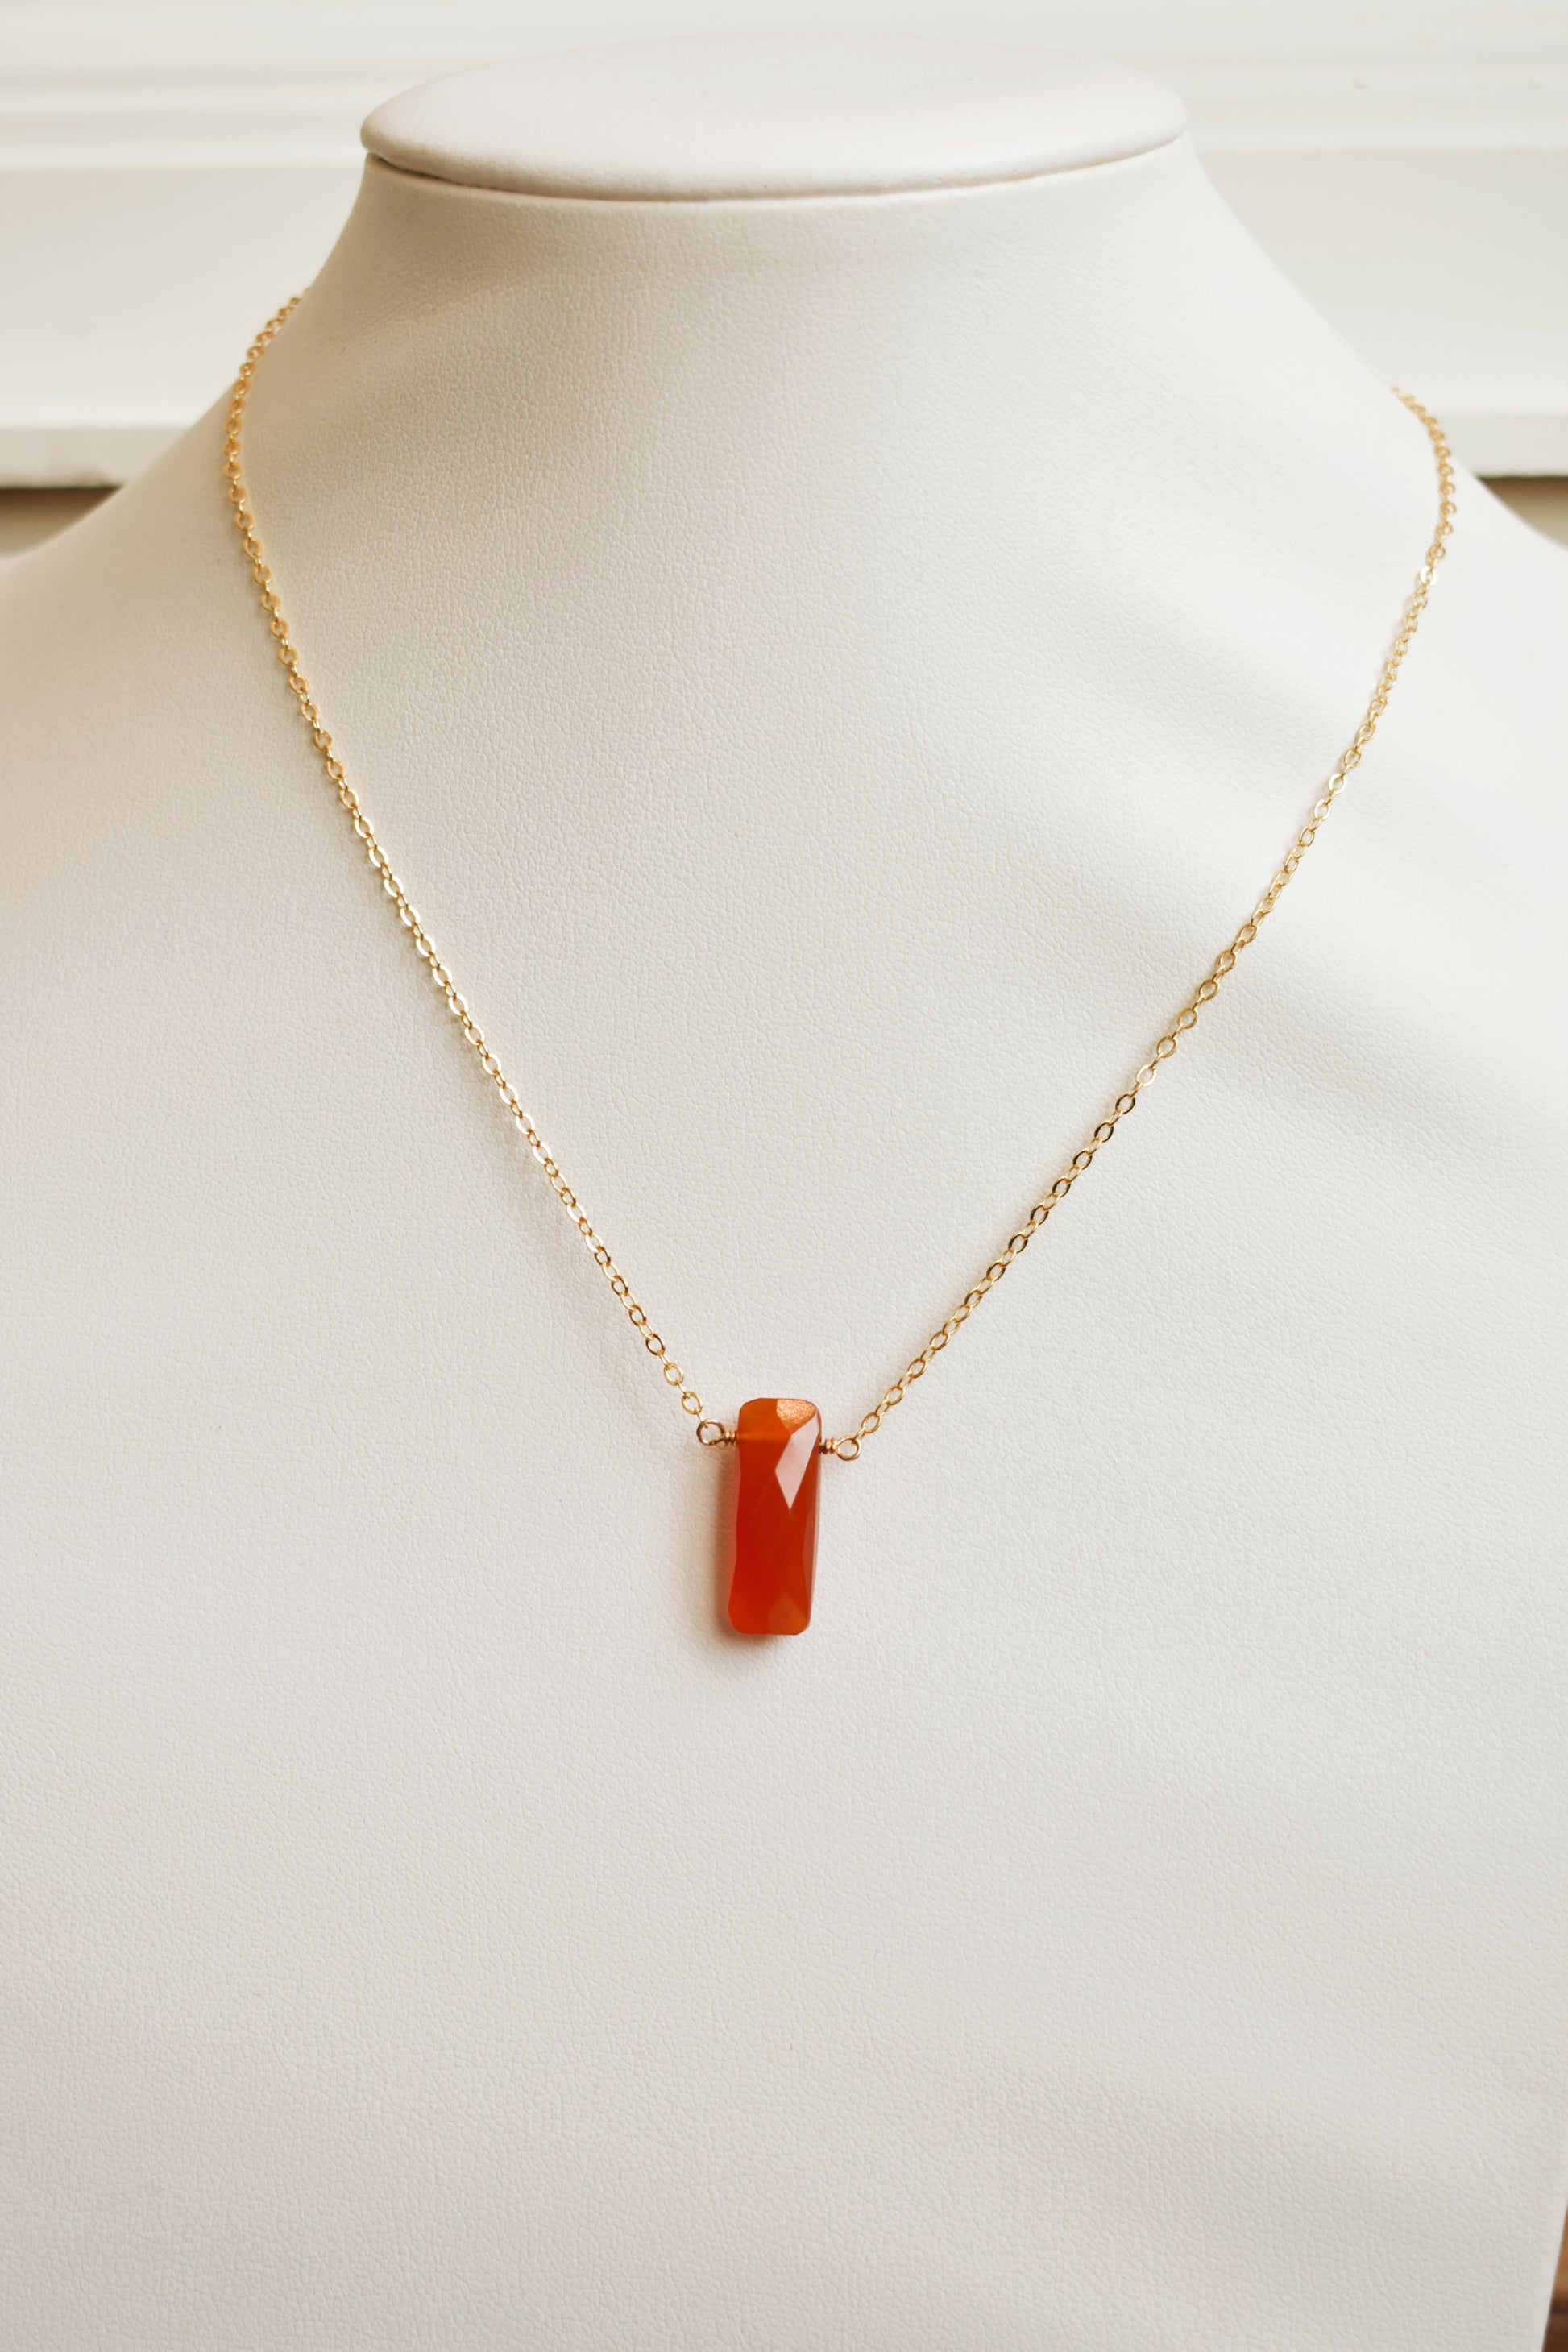 orange chalcendony gold plated choker length layering necklace